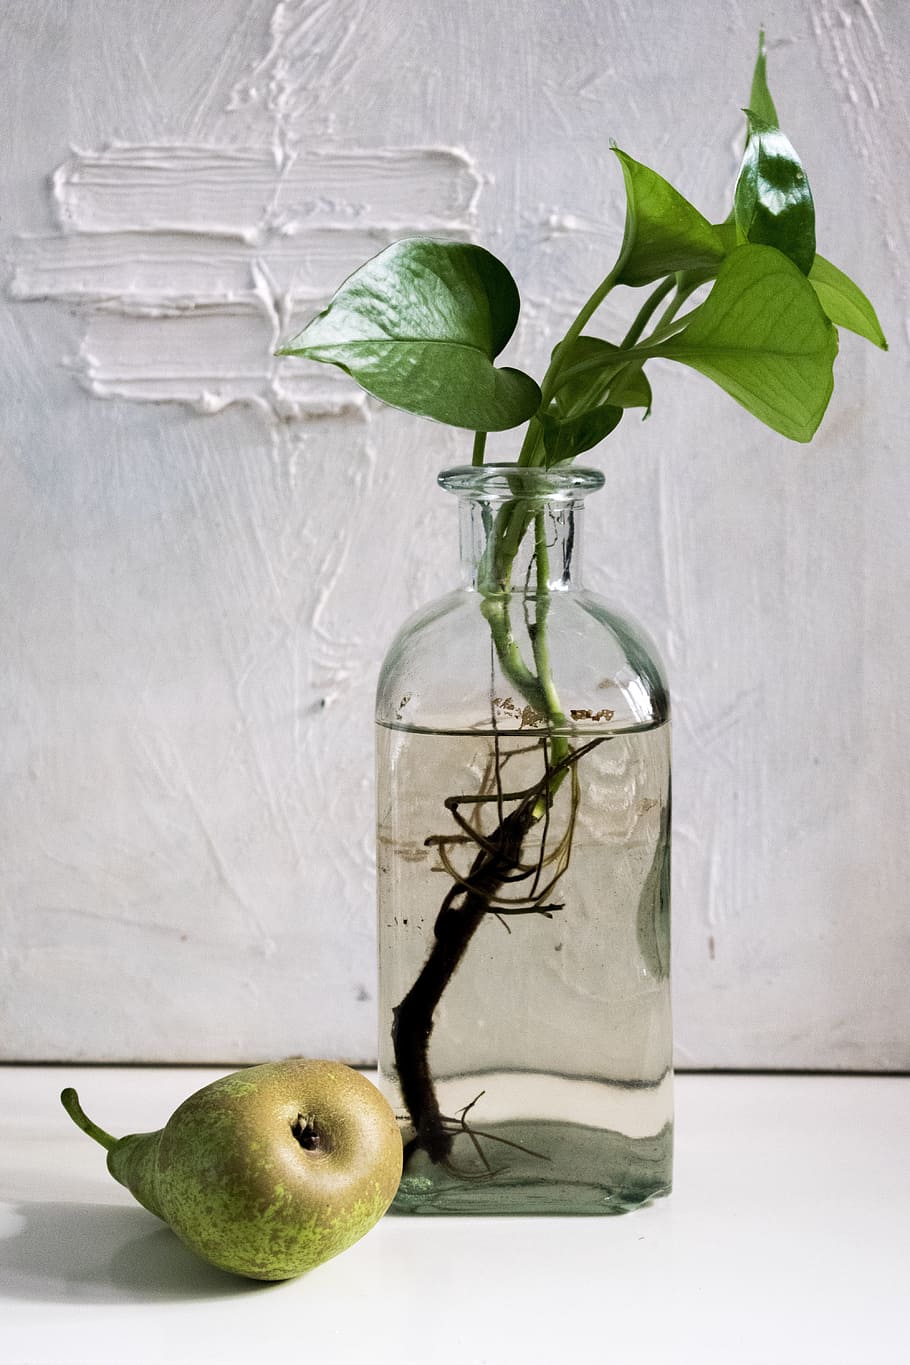 green, plant, bottle, composition, pear, light, water, pact, fruit, leaf